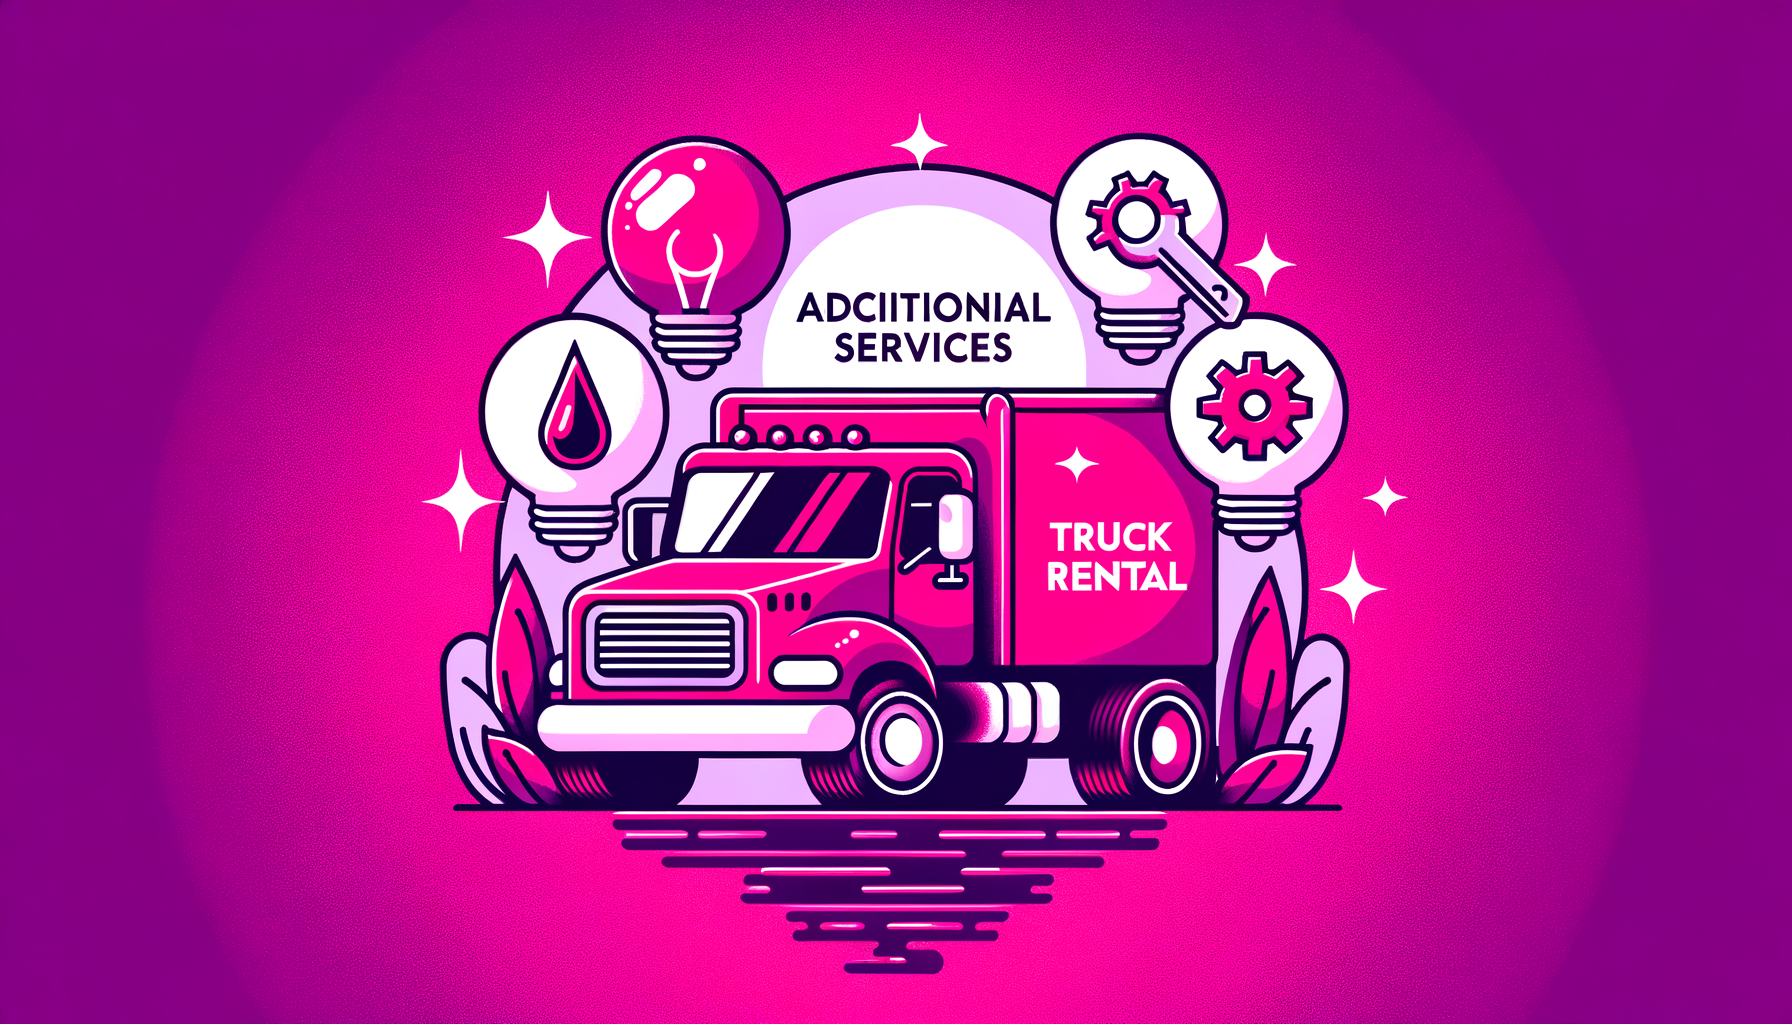 Cartoon illustration of a fuchsia-colored truck with symbols representing additional services such as GPS navigation, moving supplies, and towing equipment offered by Enterprise Truck Rental.